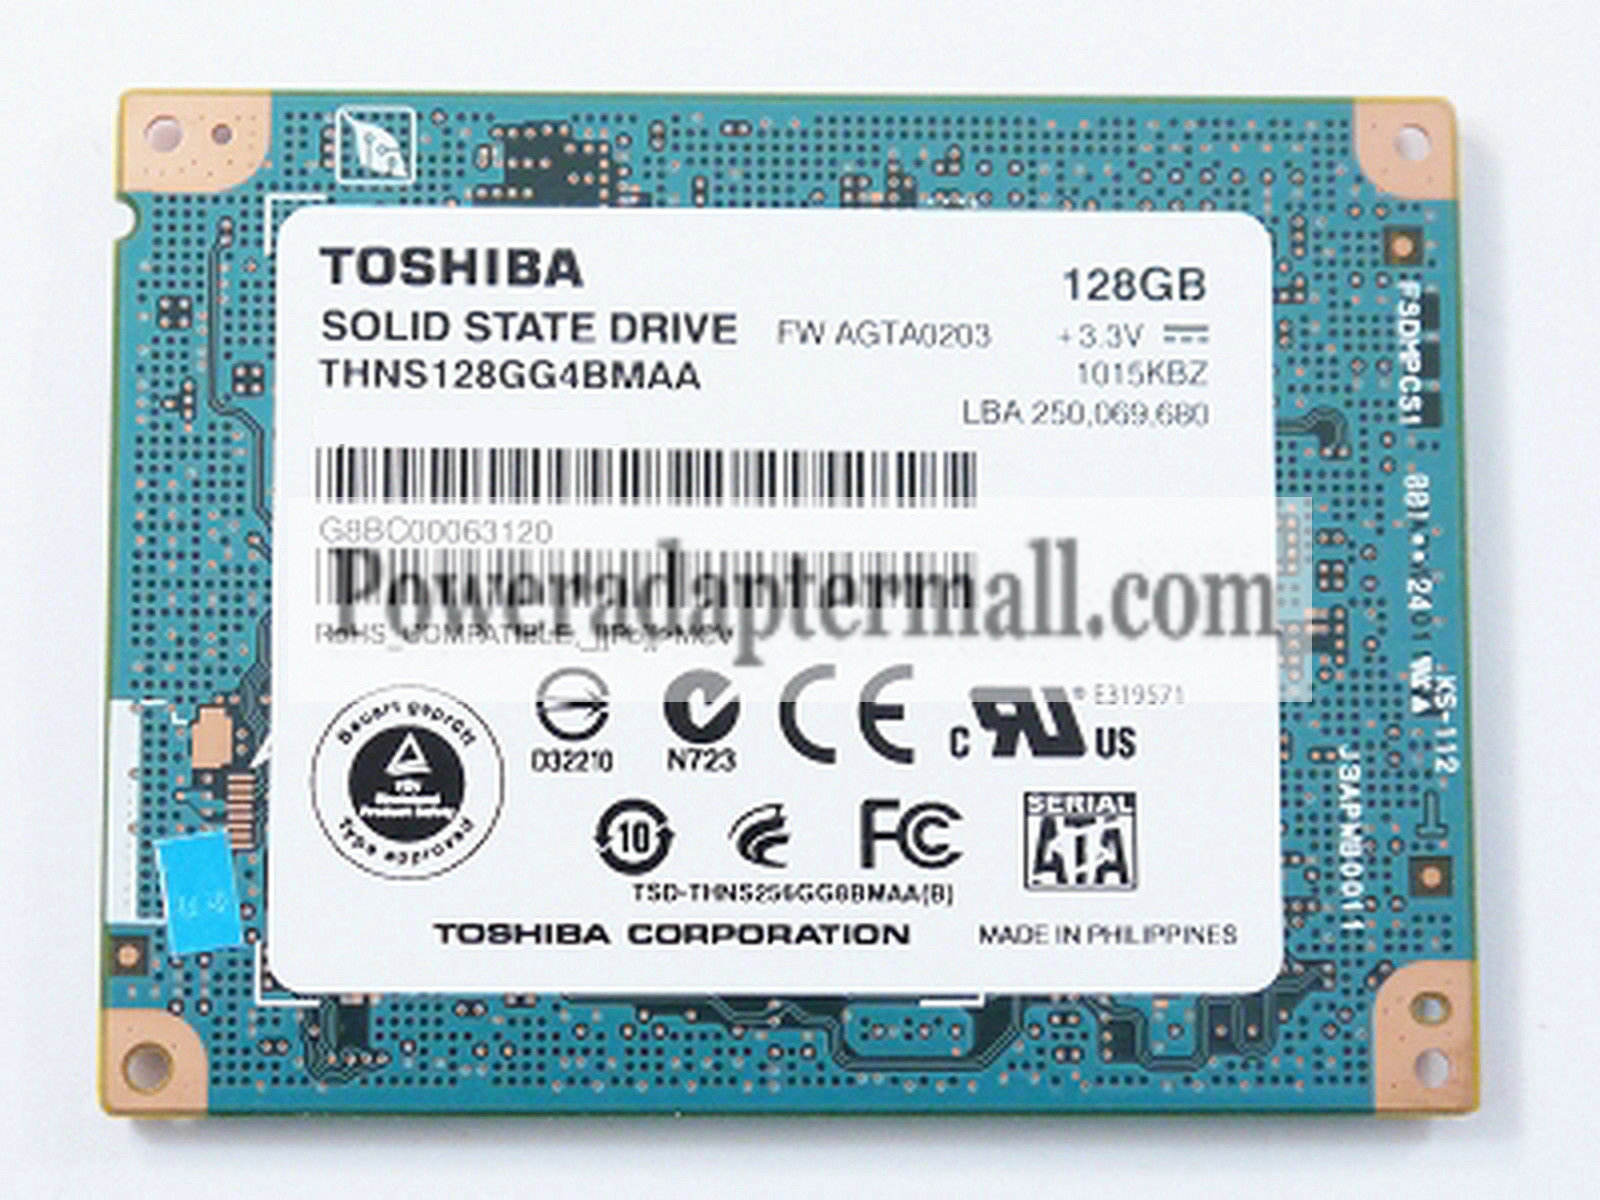 Toshiba 128GB SSD Solid State Drive for MacBook Air 13" A1304